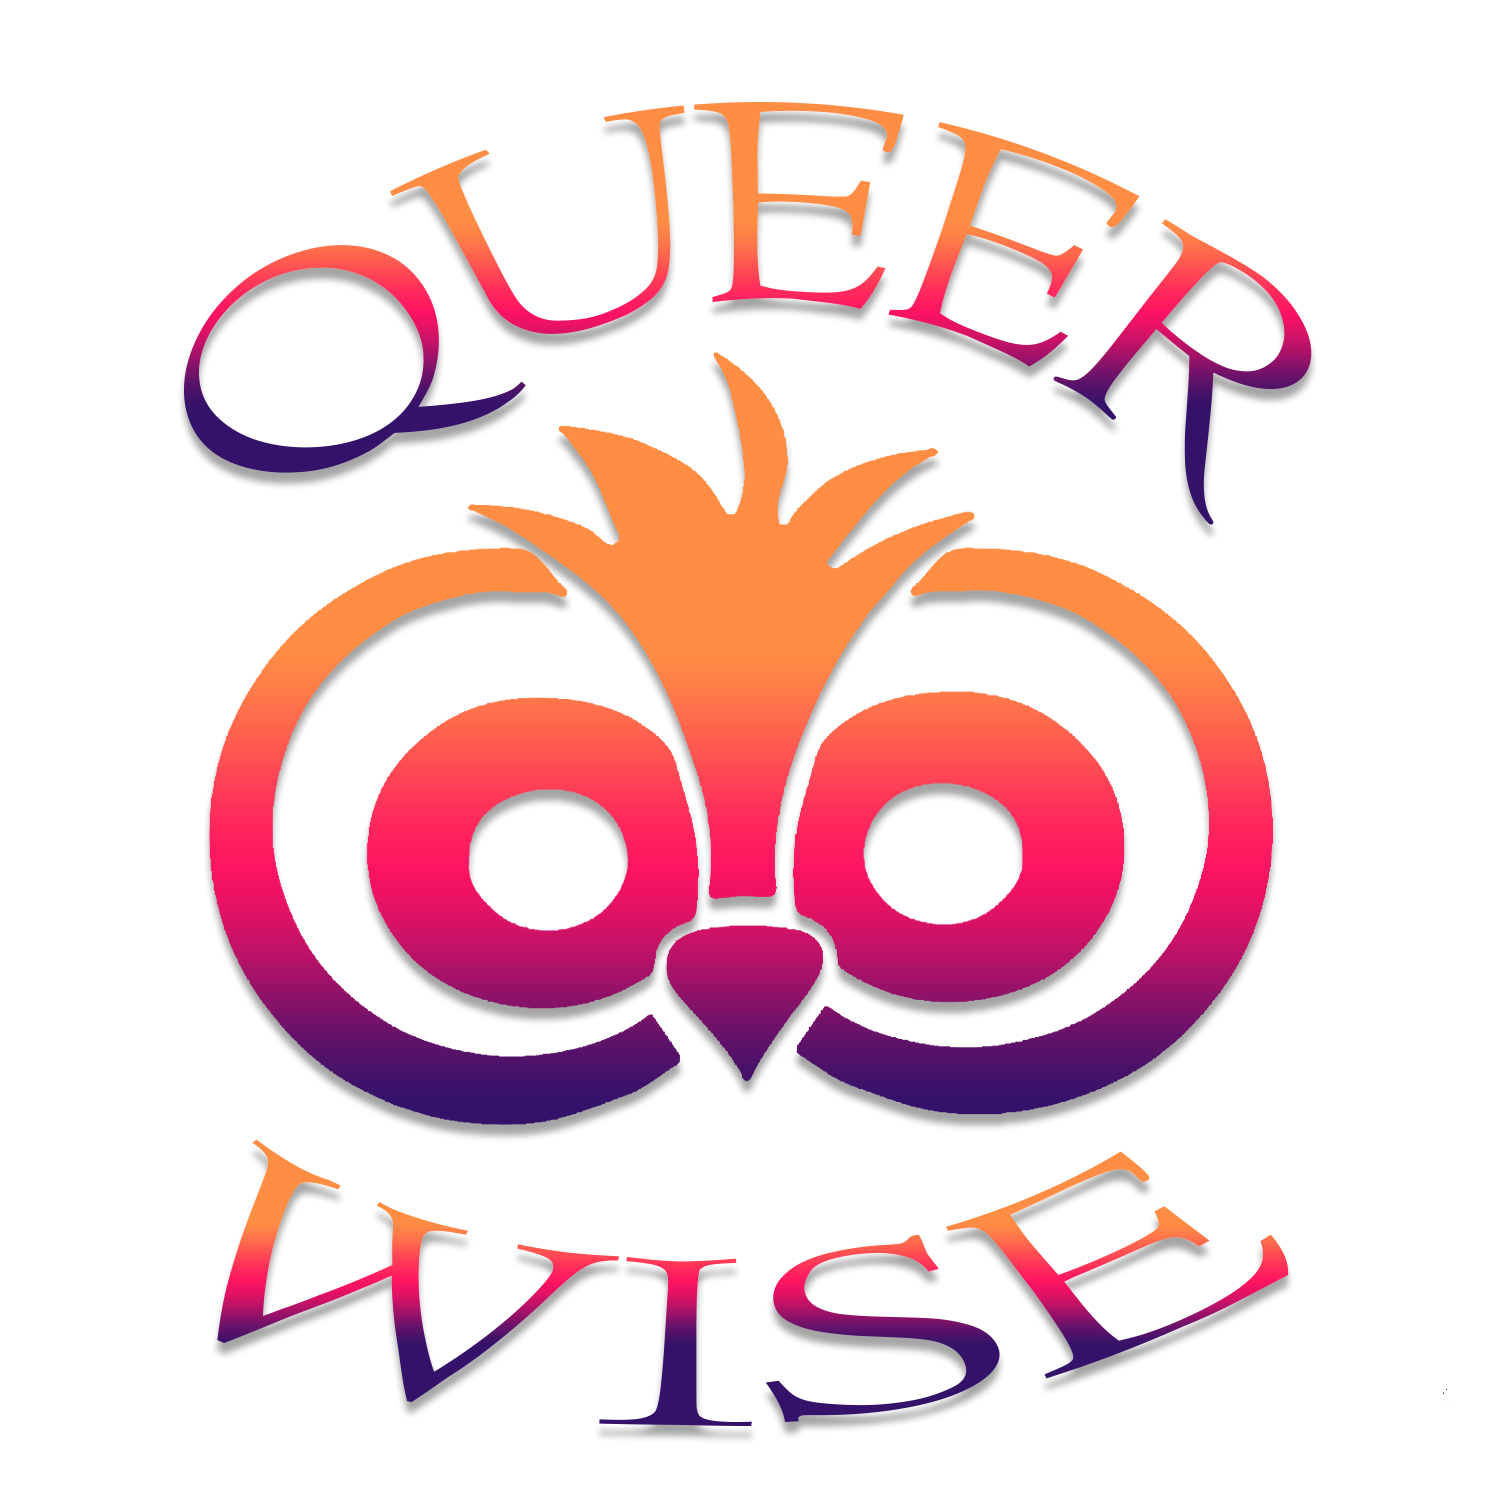 Queerwise